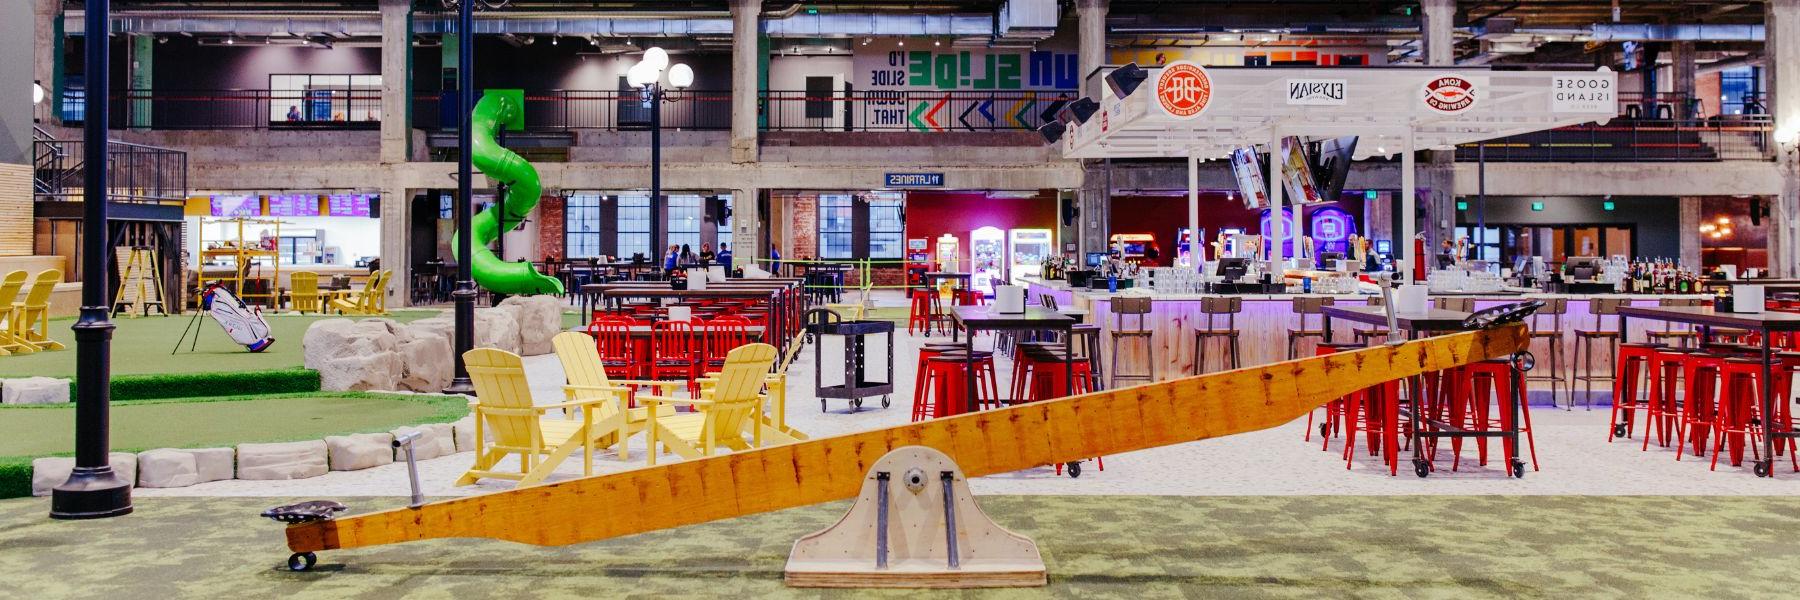 Armory STL, a new entertainment district, offers everything from adult seesaws to cold drinks.